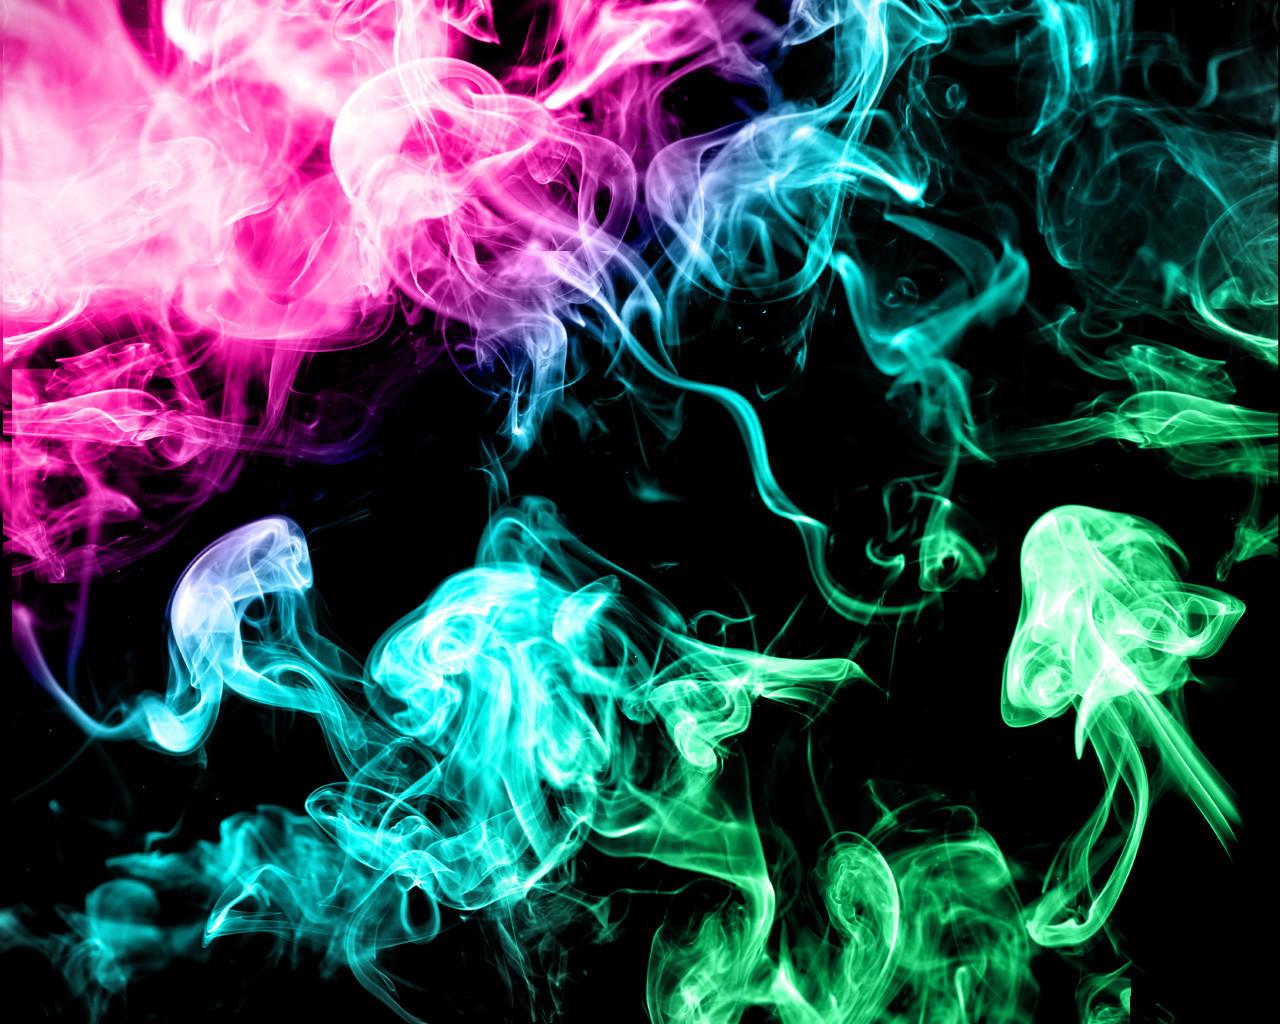 Colored Smoke Photography Hd Images 3 Hd Wallpapers | HD ...